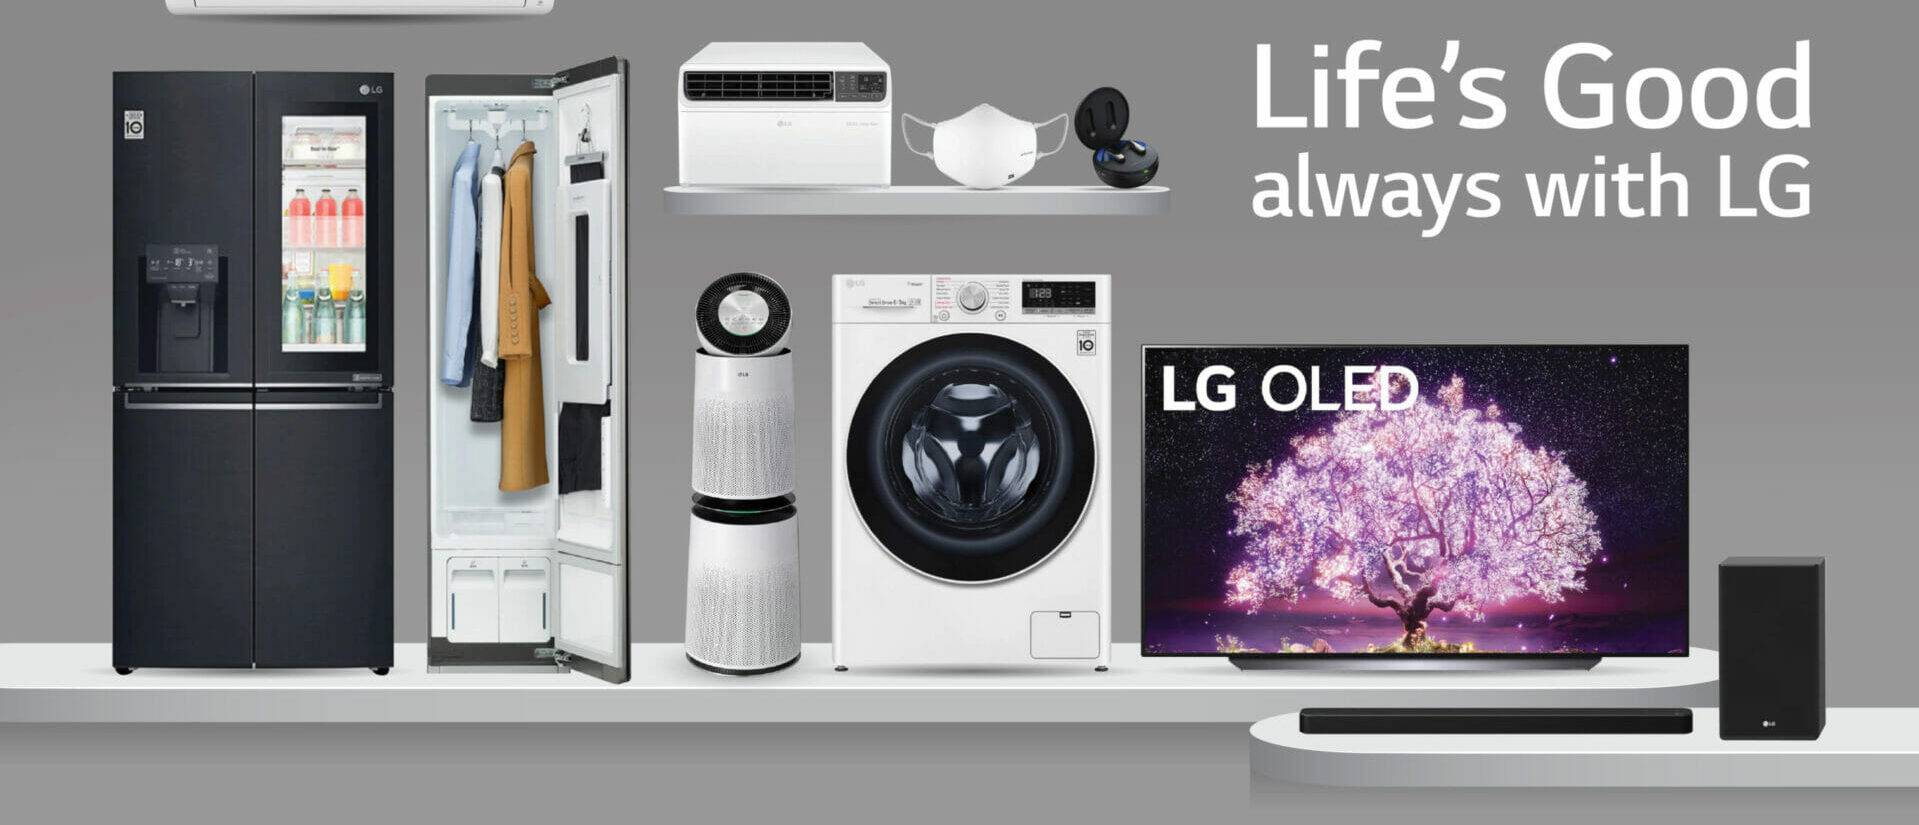 LG Service Center Customer Care in Hyderabad/ Call Now : 1800 889 9644